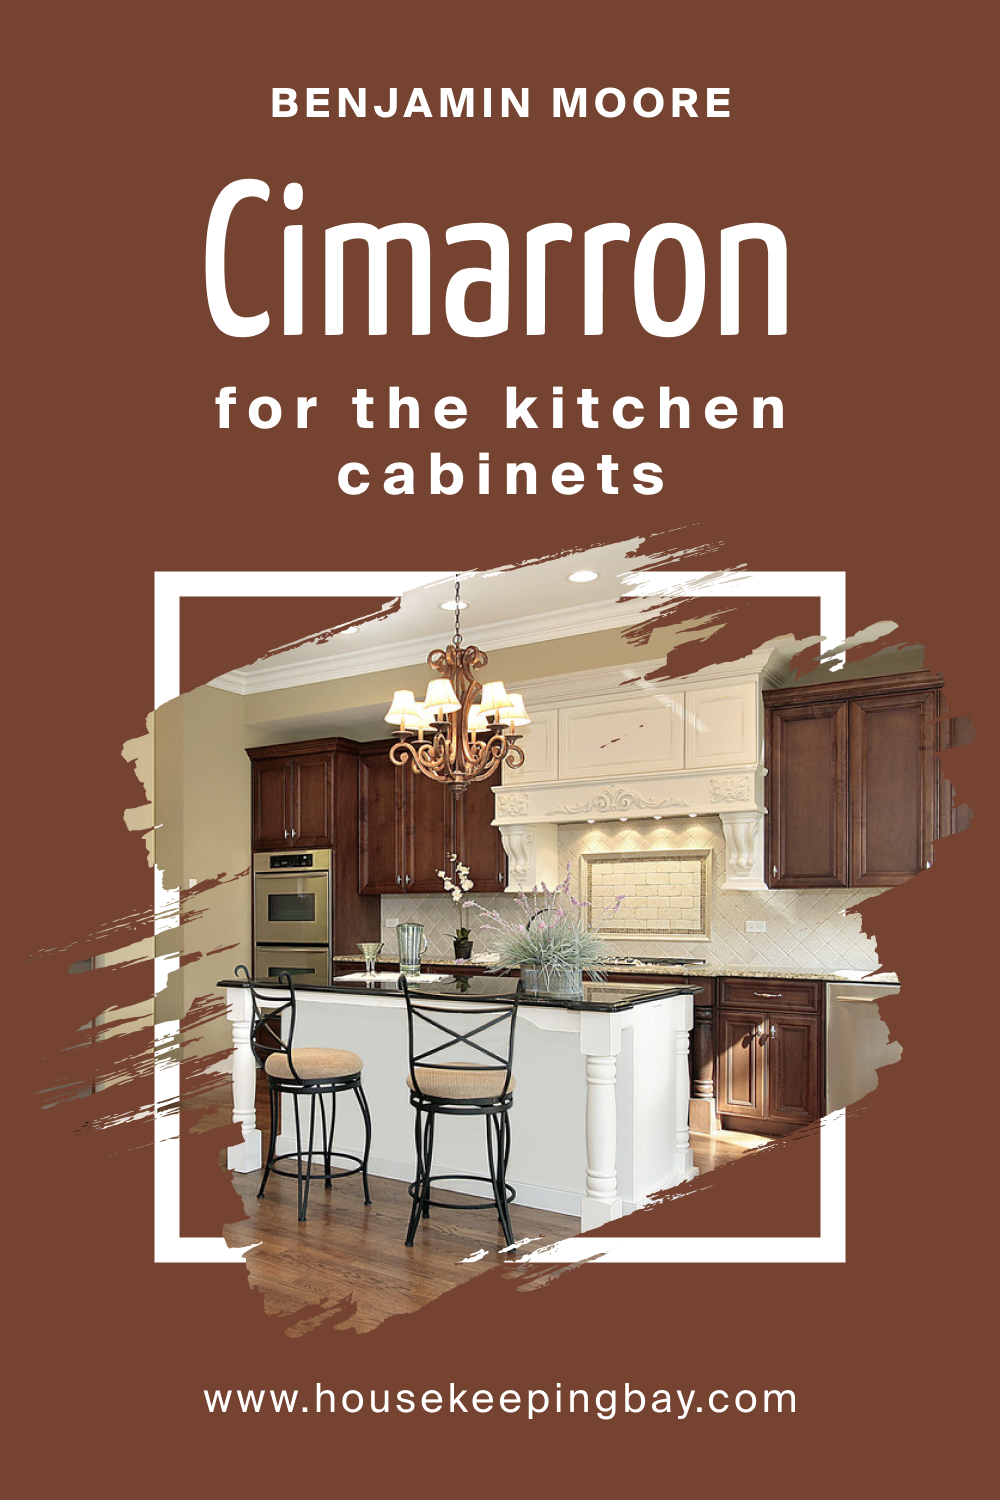 How to Use BM Cimarron 2093-10 on Kitchen Cabinets?